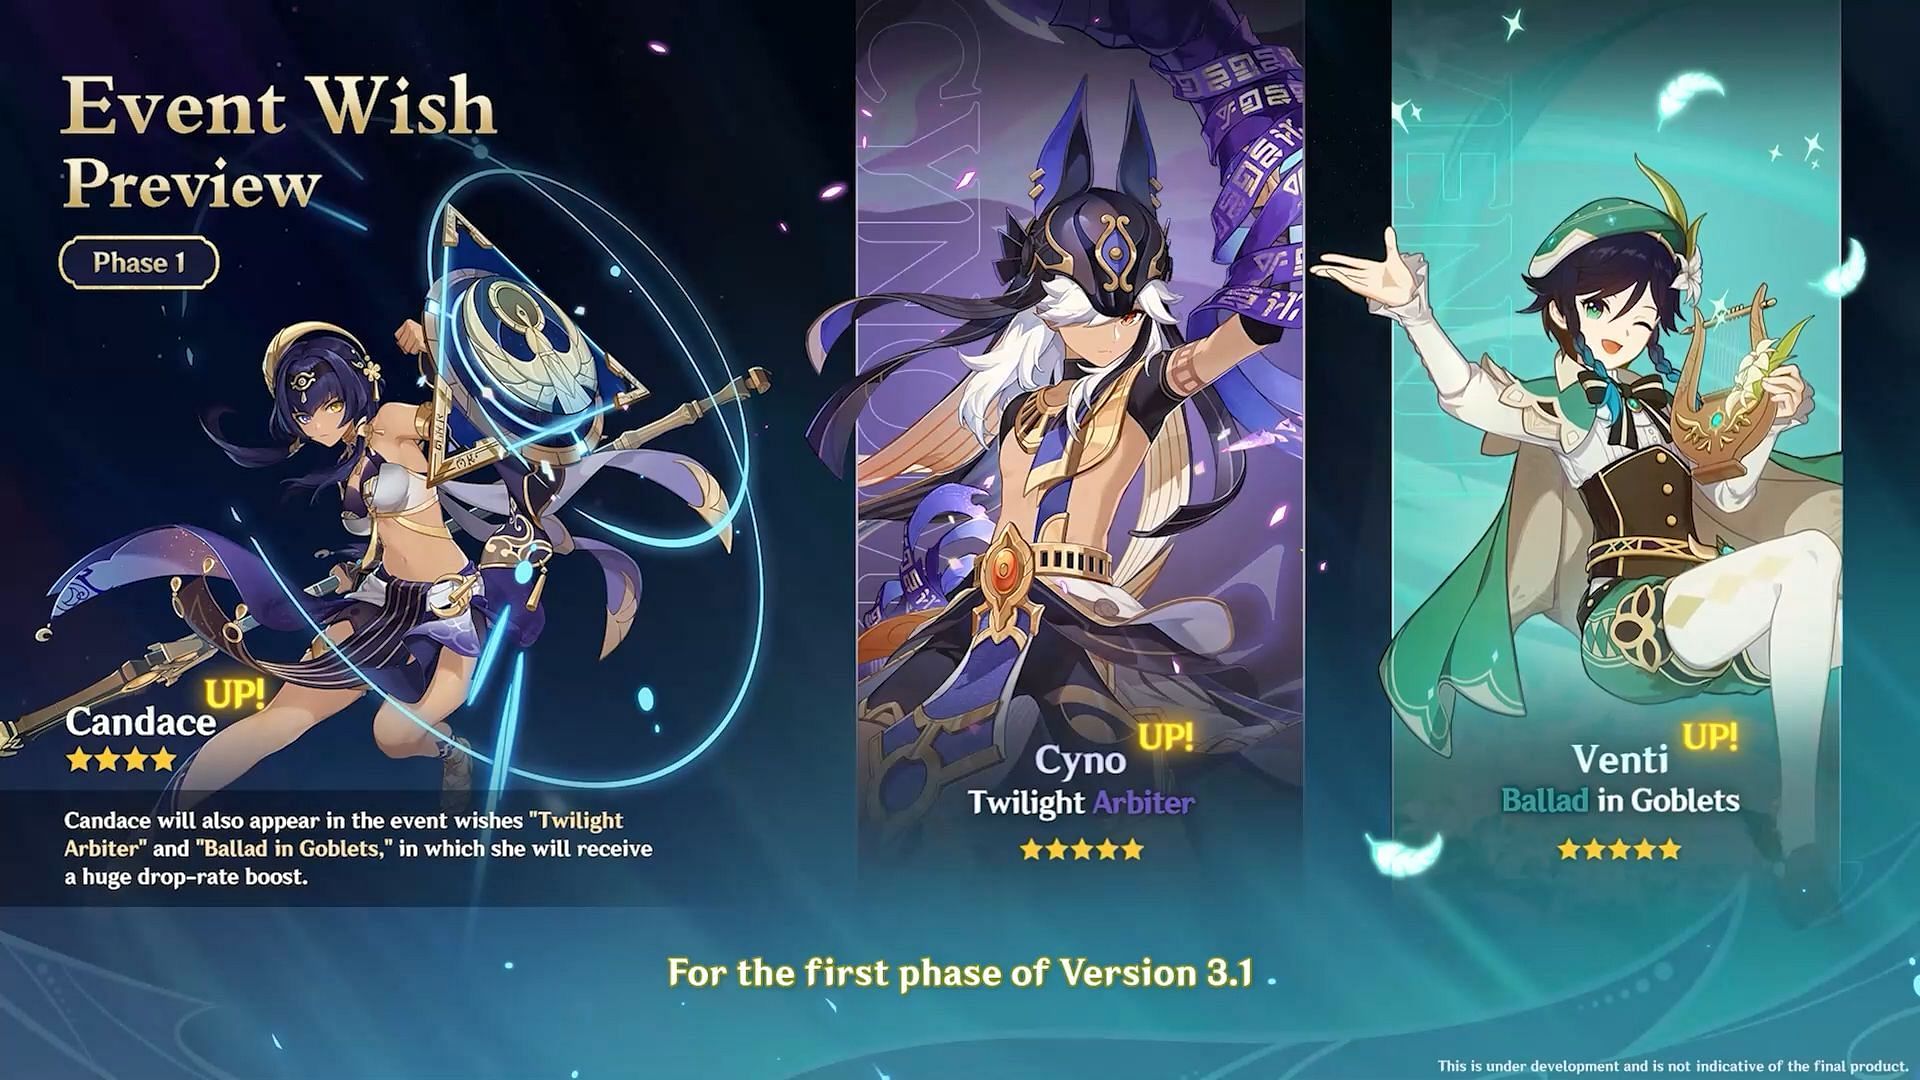 Cyno and Venti will be featured in the first phase (Image via HoYoverse)